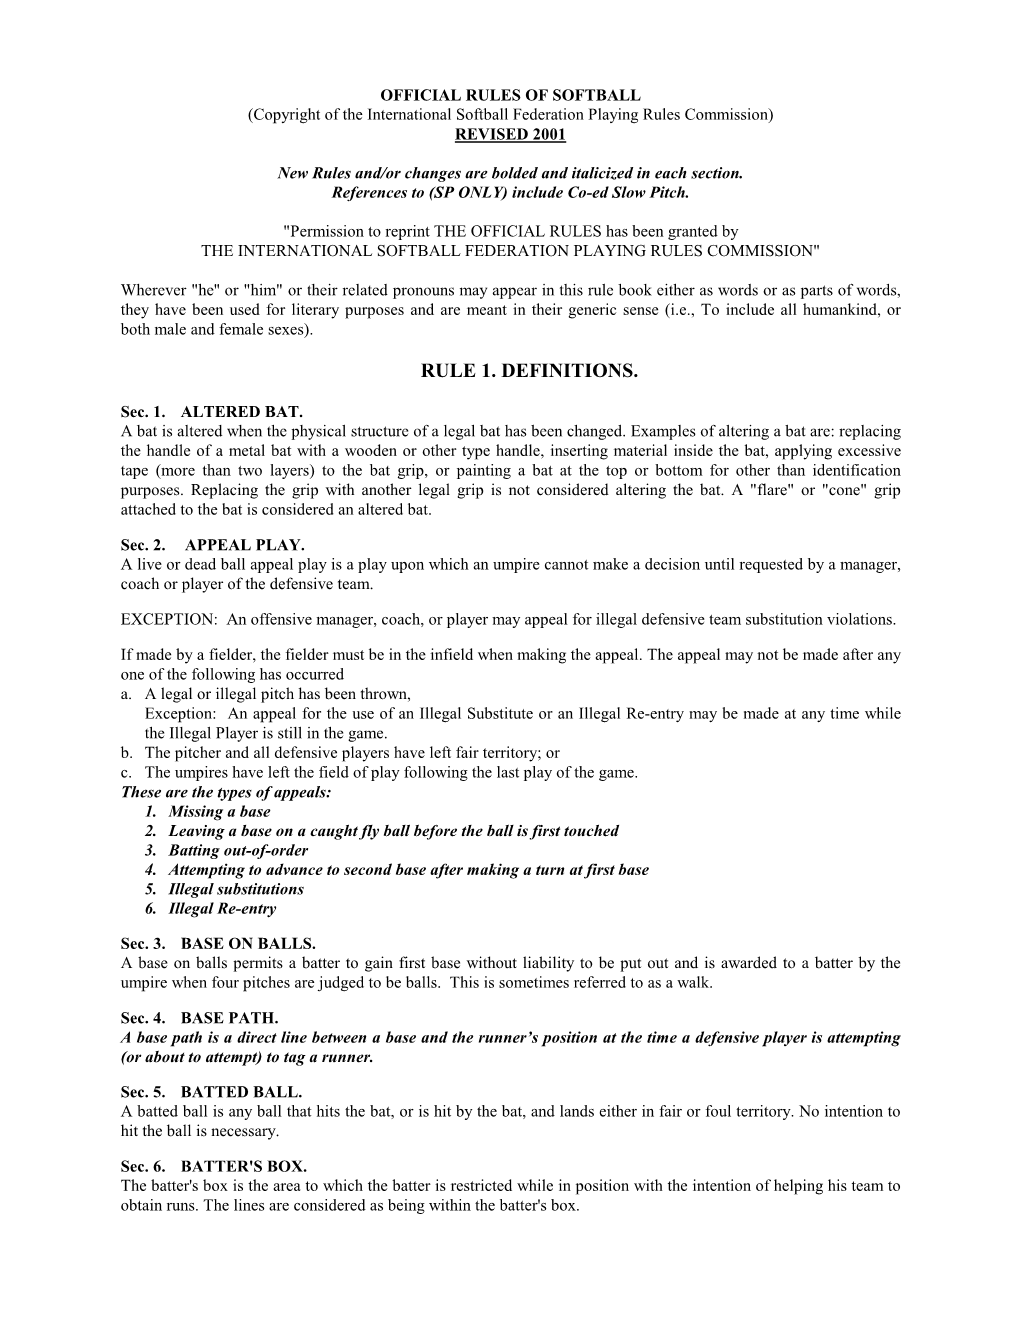 OFFICIAL RULES of SOFTBALL (Copyright of the International Softball Federation Playing Rules Commission) REVISED 2001